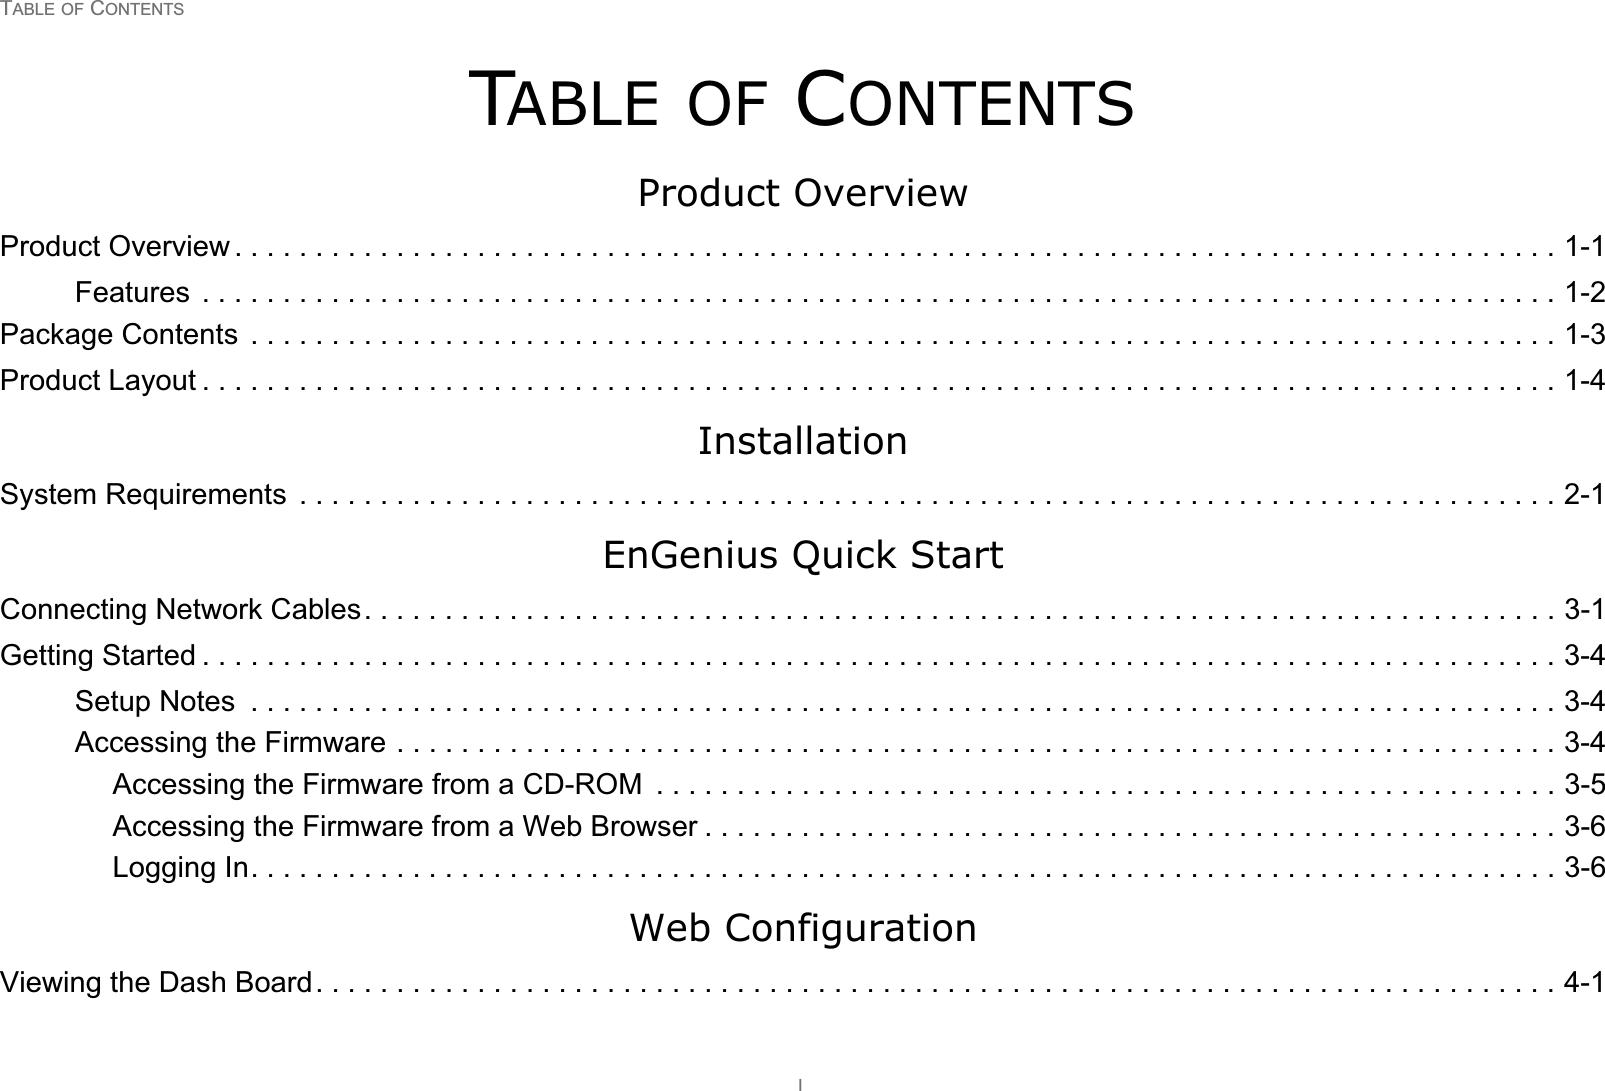 TABLE OF CONTENTSITABLE OF CONTENTSProduct OverviewProduct Overview . . . . . . . . . . . . . . . . . . . . . . . . . . . . . . . . . . . . . . . . . . . . . . . . . . . . . . . . . . . . . . . . . . . . . . . . . . . . . . . . . . 1-1Features  . . . . . . . . . . . . . . . . . . . . . . . . . . . . . . . . . . . . . . . . . . . . . . . . . . . . . . . . . . . . . . . . . . . . . . . . . . . . . . . . . . . . 1-2Package Contents  . . . . . . . . . . . . . . . . . . . . . . . . . . . . . . . . . . . . . . . . . . . . . . . . . . . . . . . . . . . . . . . . . . . . . . . . . . . . . . . . . 1-3Product Layout . . . . . . . . . . . . . . . . . . . . . . . . . . . . . . . . . . . . . . . . . . . . . . . . . . . . . . . . . . . . . . . . . . . . . . . . . . . . . . . . . . . . 1-4InstallationSystem Requirements  . . . . . . . . . . . . . . . . . . . . . . . . . . . . . . . . . . . . . . . . . . . . . . . . . . . . . . . . . . . . . . . . . . . . . . . . . . . . . . 2-1EnGenius Quick StartConnecting Network Cables. . . . . . . . . . . . . . . . . . . . . . . . . . . . . . . . . . . . . . . . . . . . . . . . . . . . . . . . . . . . . . . . . . . . . . . . . . 3-1Getting Started . . . . . . . . . . . . . . . . . . . . . . . . . . . . . . . . . . . . . . . . . . . . . . . . . . . . . . . . . . . . . . . . . . . . . . . . . . . . . . . . . . . . 3-4Setup Notes  . . . . . . . . . . . . . . . . . . . . . . . . . . . . . . . . . . . . . . . . . . . . . . . . . . . . . . . . . . . . . . . . . . . . . . . . . . . . . . . . . 3-4Accessing the Firmware . . . . . . . . . . . . . . . . . . . . . . . . . . . . . . . . . . . . . . . . . . . . . . . . . . . . . . . . . . . . . . . . . . . . . . . . 3-4Accessing the Firmware from a CD-ROM  . . . . . . . . . . . . . . . . . . . . . . . . . . . . . . . . . . . . . . . . . . . . . . . . . . . . . . . . 3-5Accessing the Firmware from a Web Browser . . . . . . . . . . . . . . . . . . . . . . . . . . . . . . . . . . . . . . . . . . . . . . . . . . . . . 3-6Logging In. . . . . . . . . . . . . . . . . . . . . . . . . . . . . . . . . . . . . . . . . . . . . . . . . . . . . . . . . . . . . . . . . . . . . . . . . . . . . . . . . 3-6Web ConfigurationViewing the Dash Board. . . . . . . . . . . . . . . . . . . . . . . . . . . . . . . . . . . . . . . . . . . . . . . . . . . . . . . . . . . . . . . . . . . . . . . . . . . . . 4-1